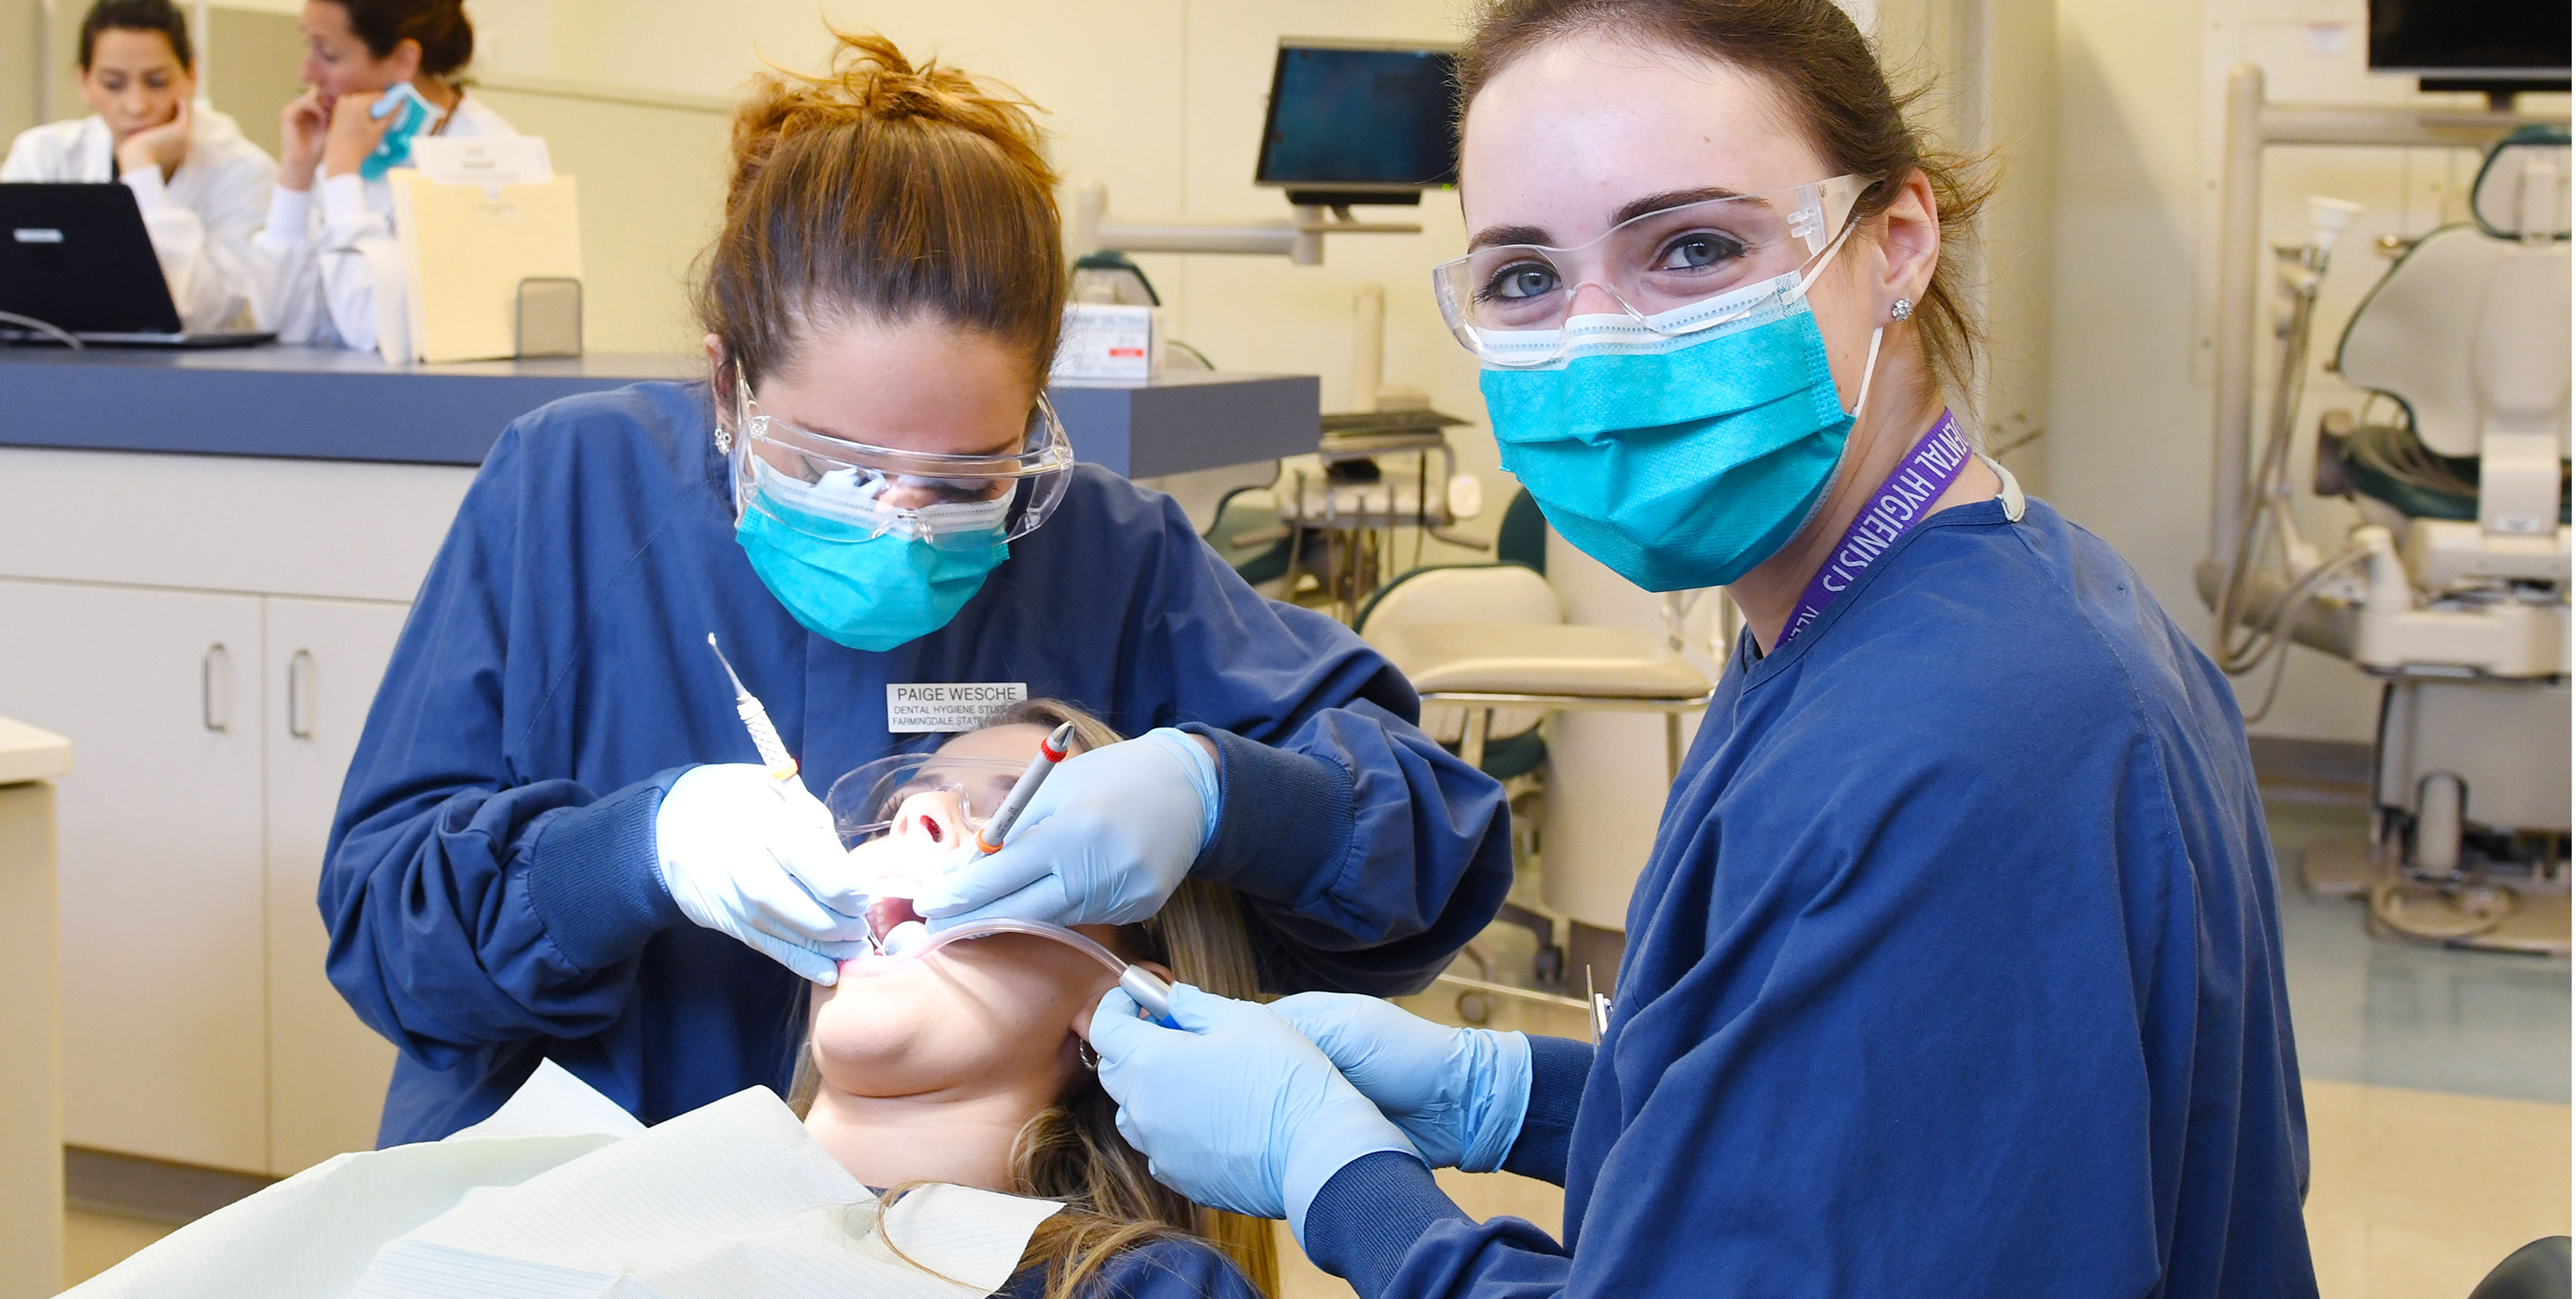 Dental Hygiene students and patient